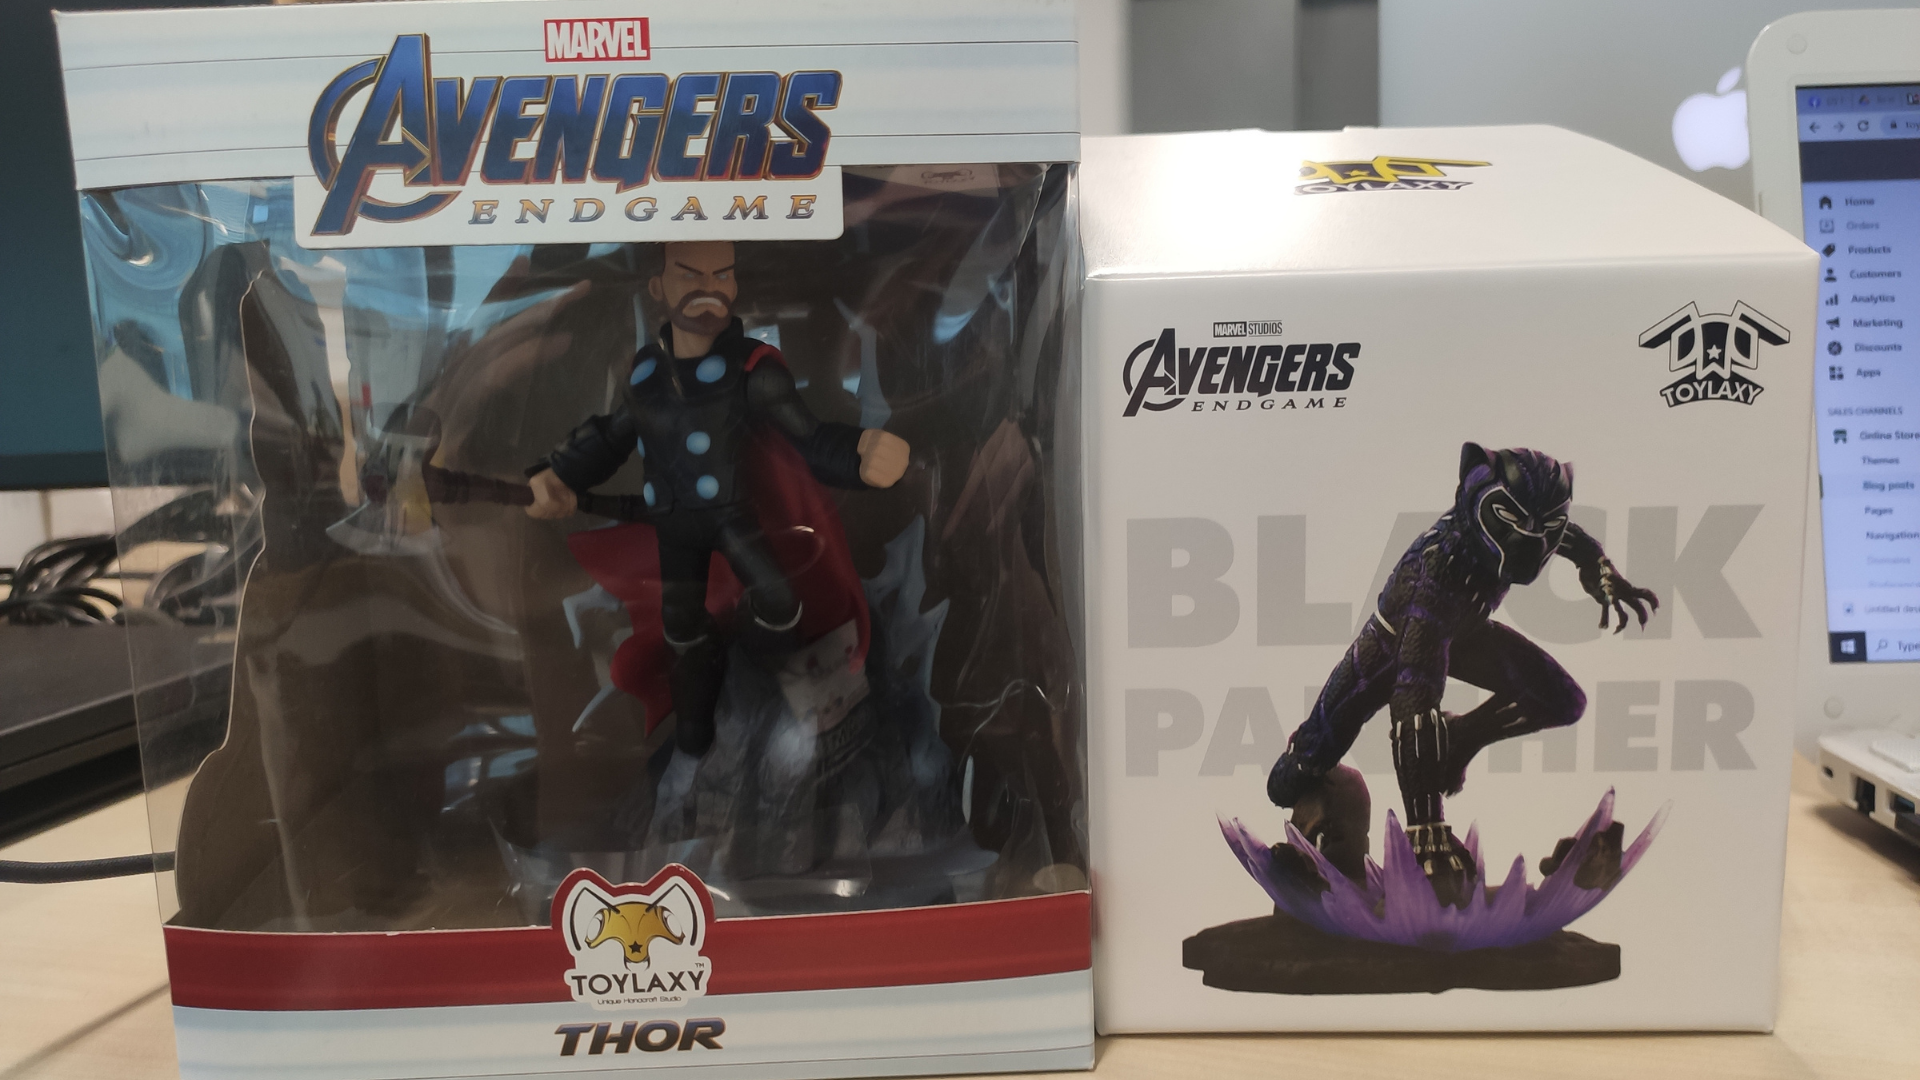 differentiation-and-comparison-between-toylaxy-marvel-avenger-4-end-game-wave3-black-panther-figure-and-wave1-thors-in-package-size-and-whole-package-box-design